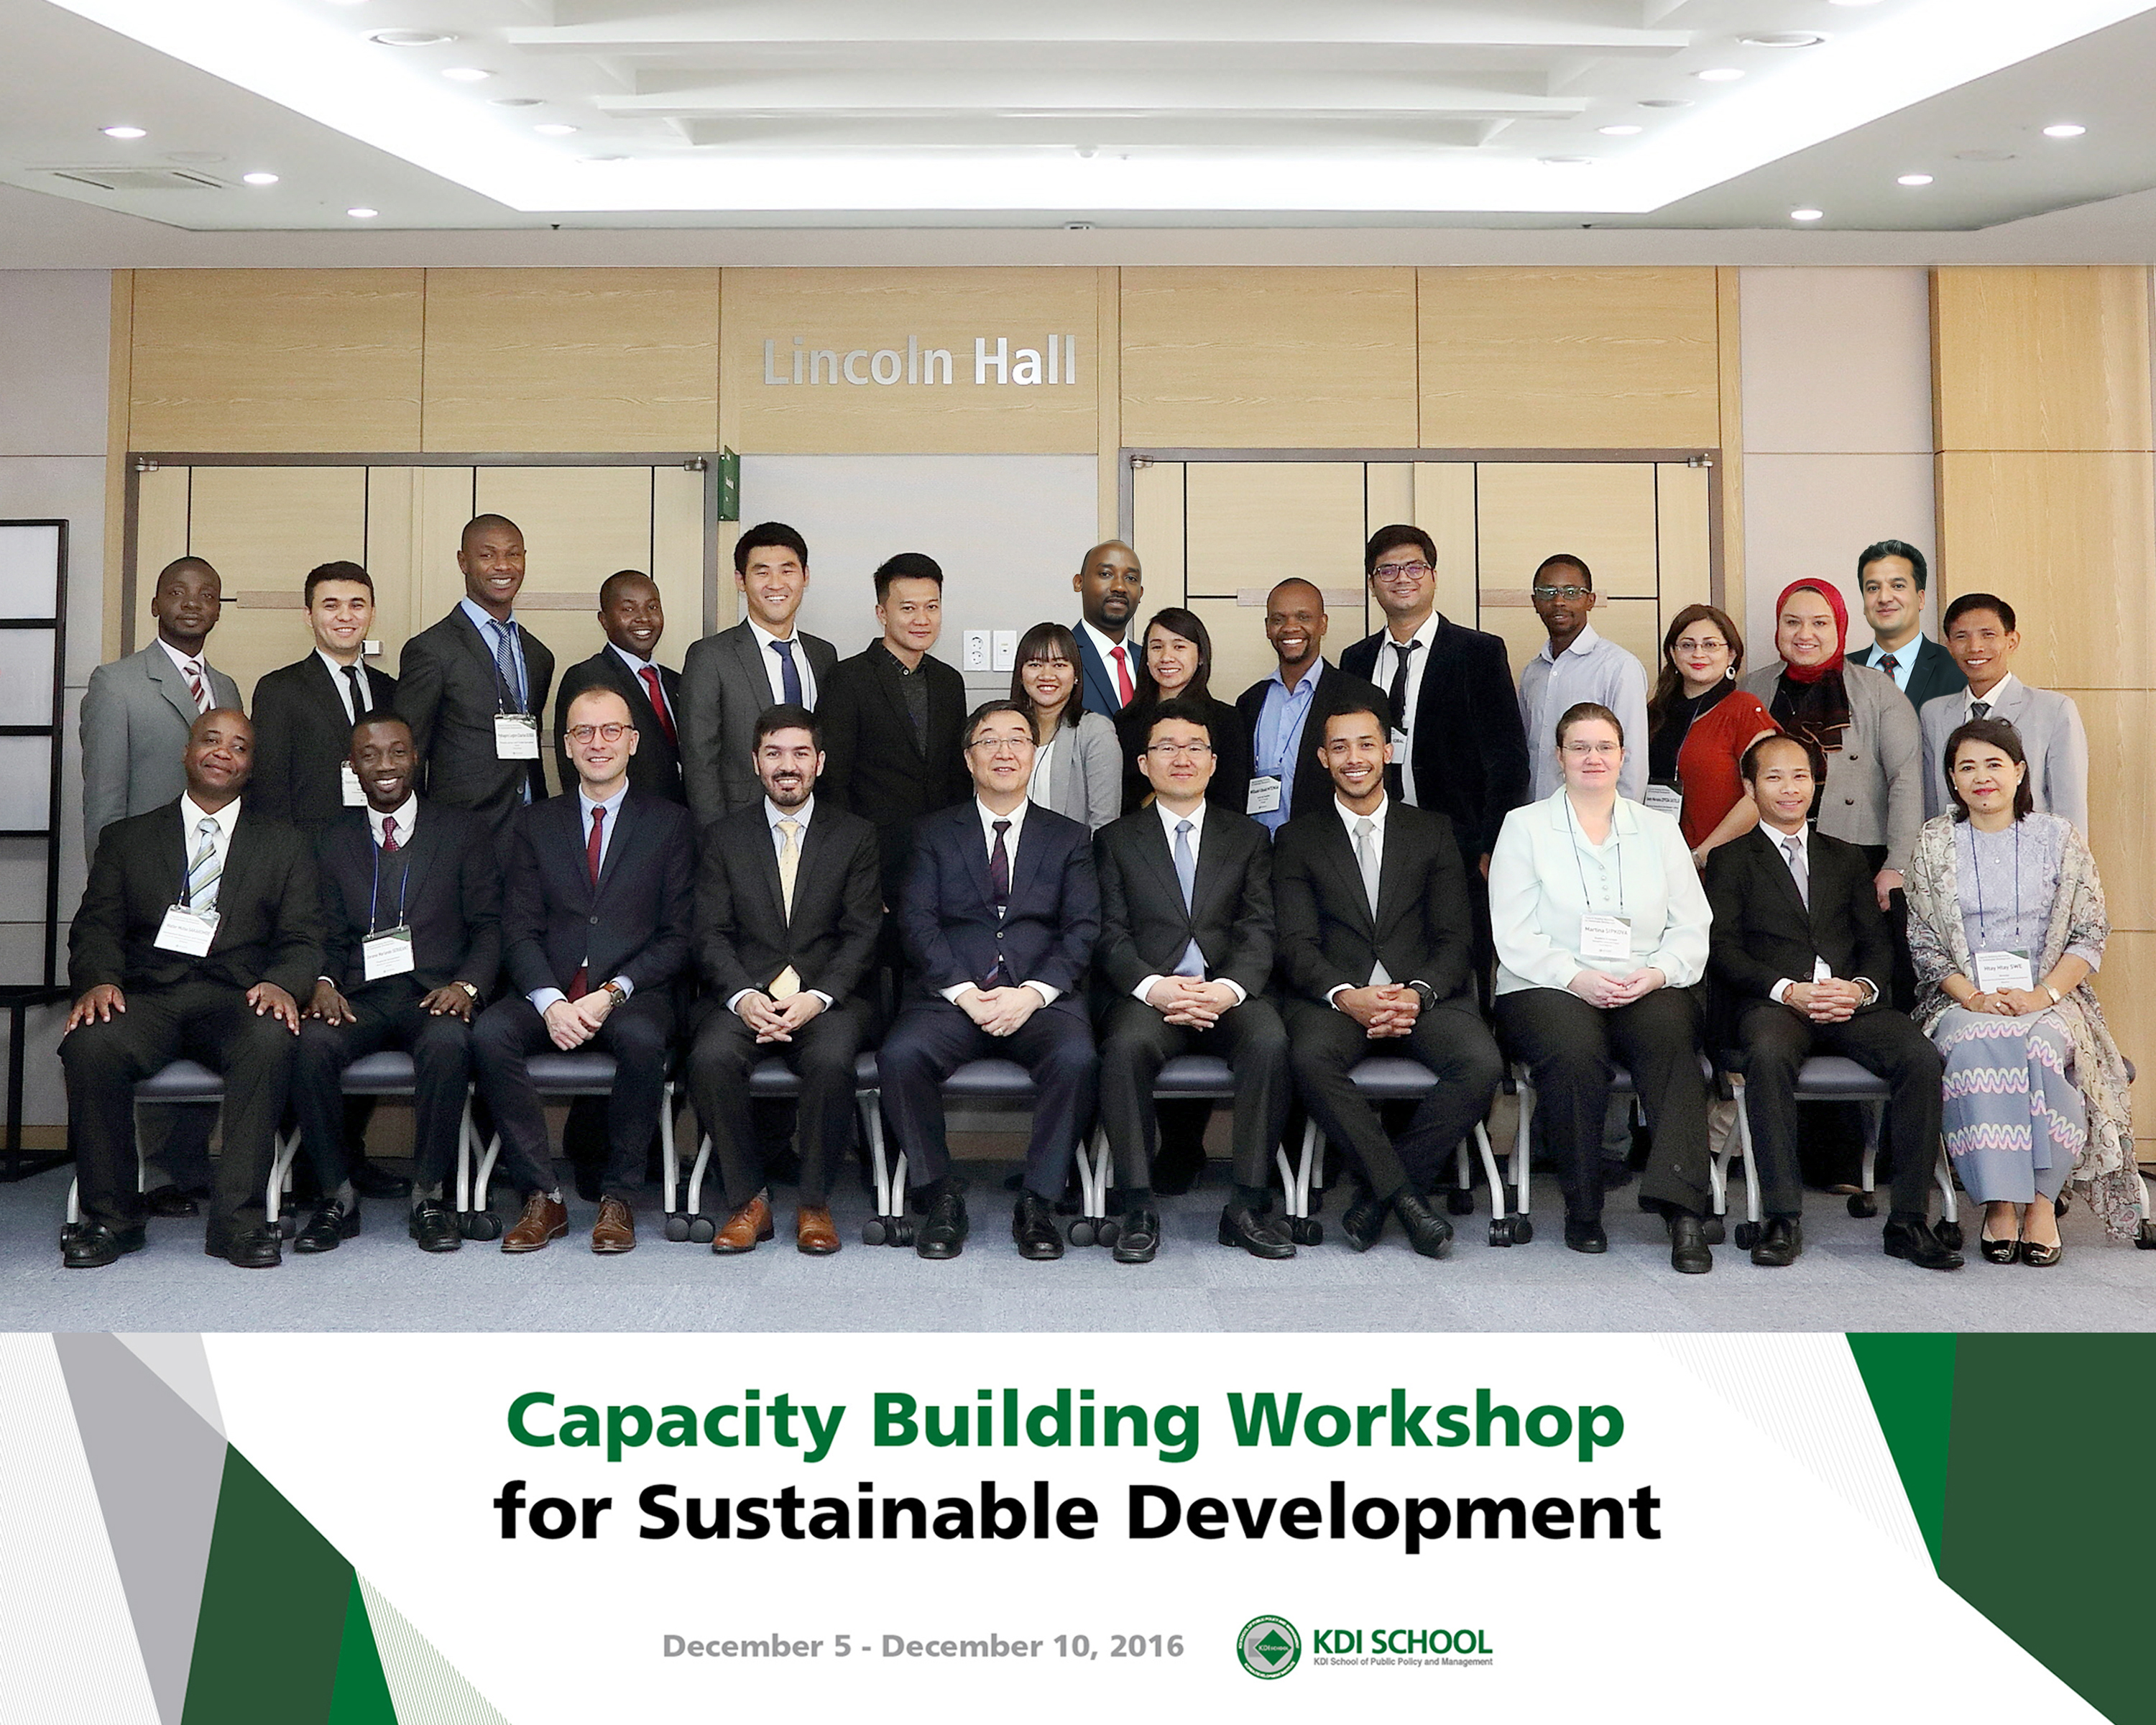 [Capacity Building Workshop for Sustainable Development] 사진1